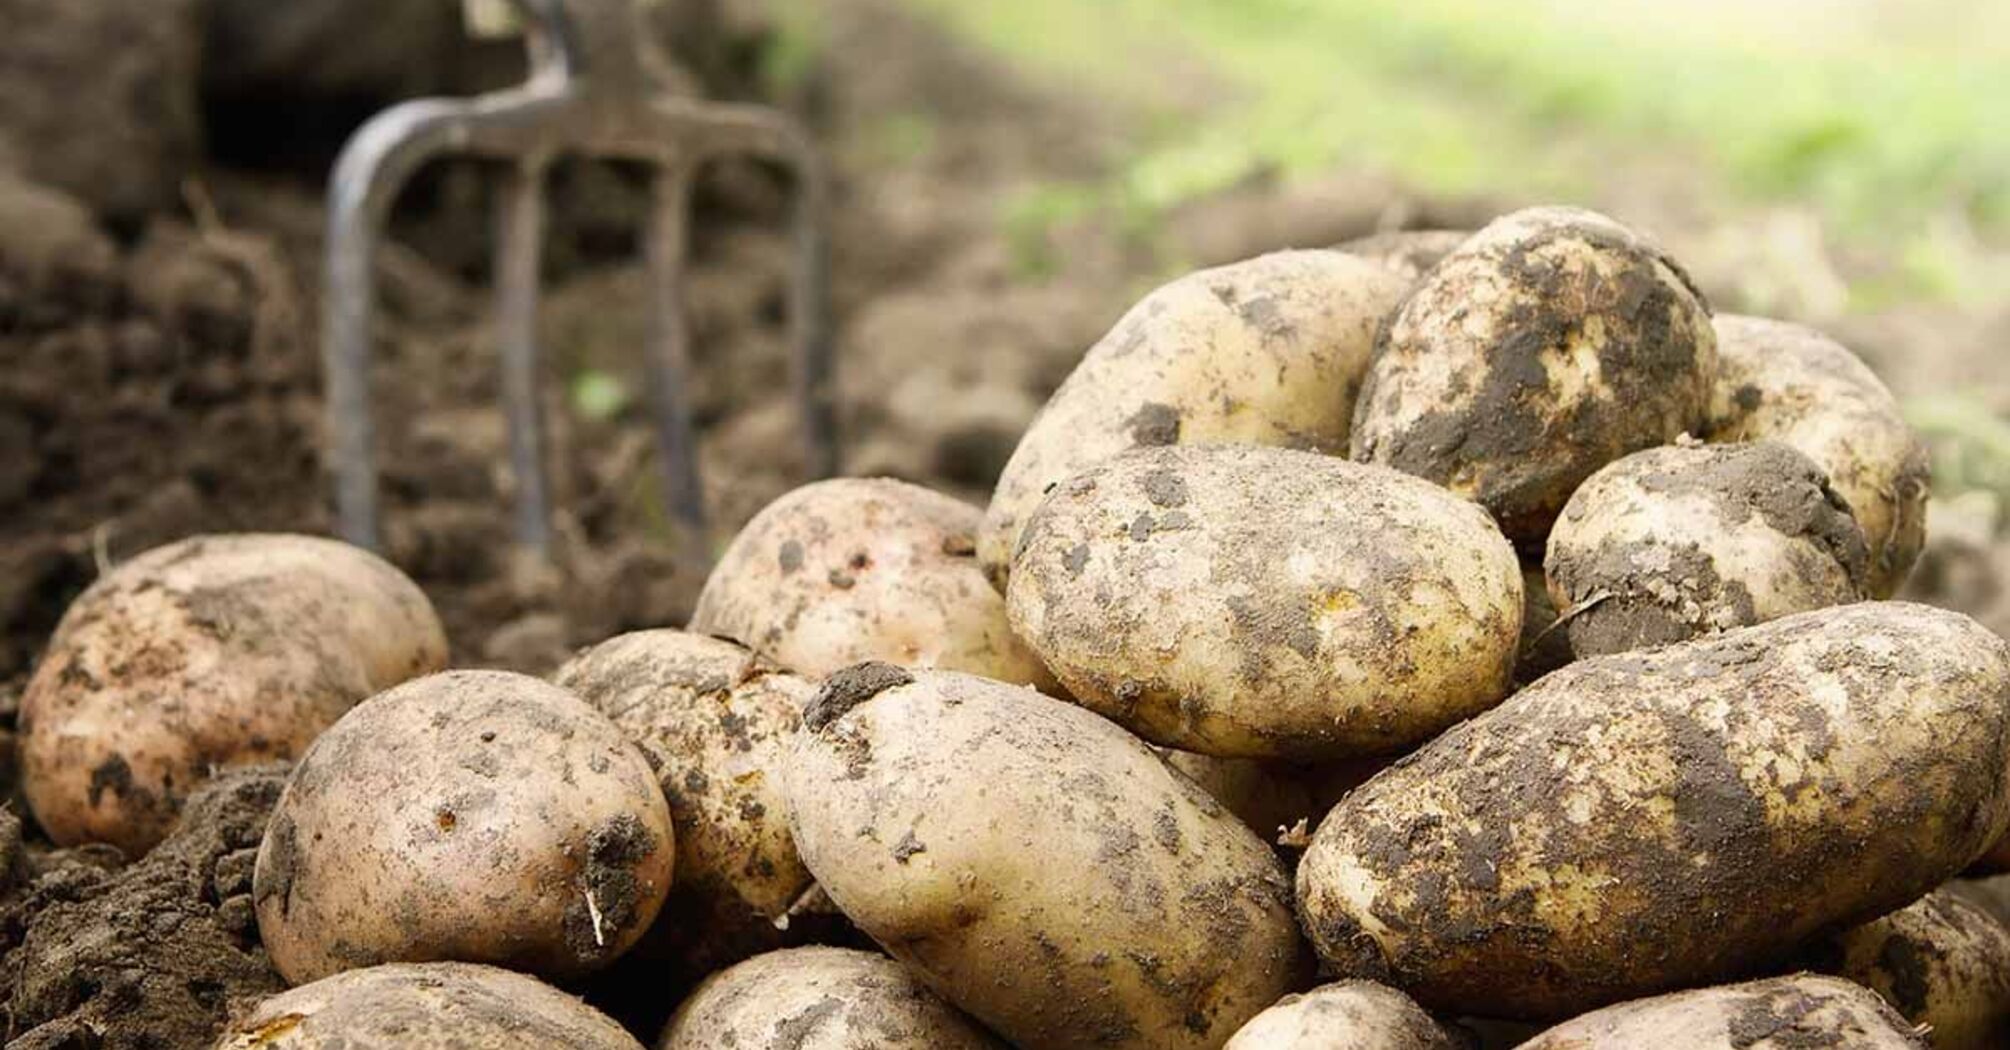 Experts have shared information about the best varieties of early potatoes